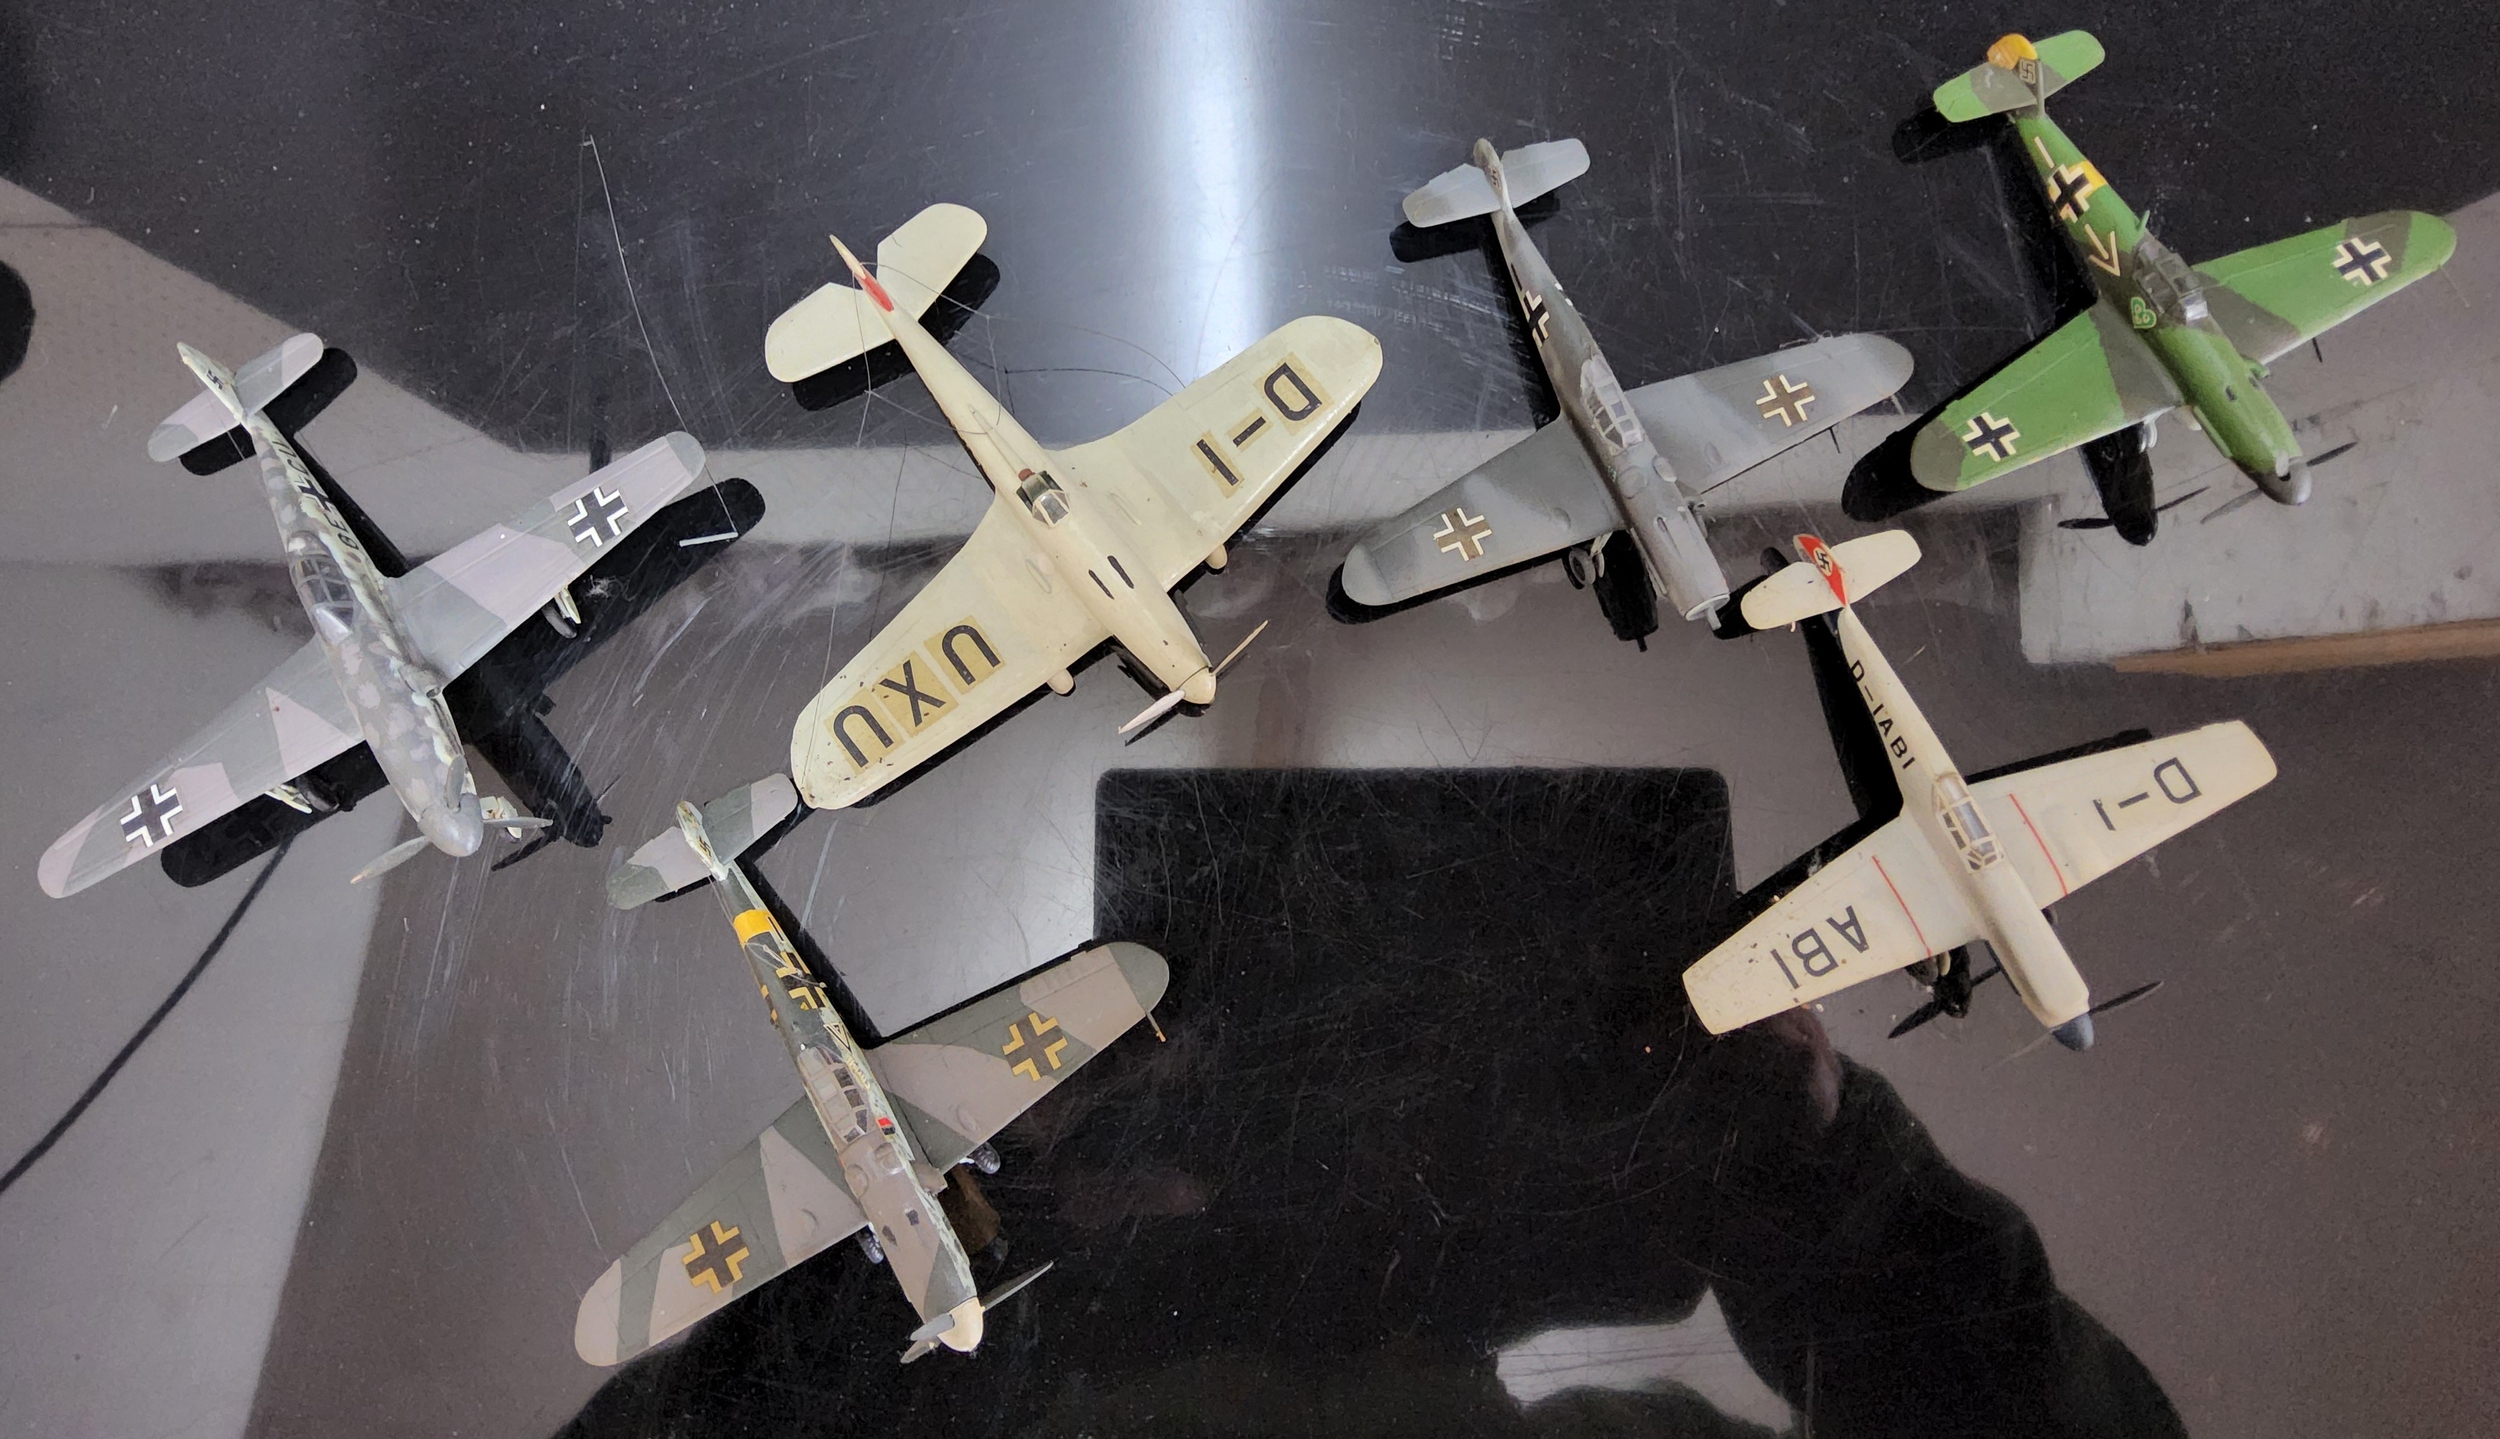 Six Luftwaffe Kit Built Model Fighter Aircraft, comprising Blohm & Voss Ha-137 and various - Image 2 of 2